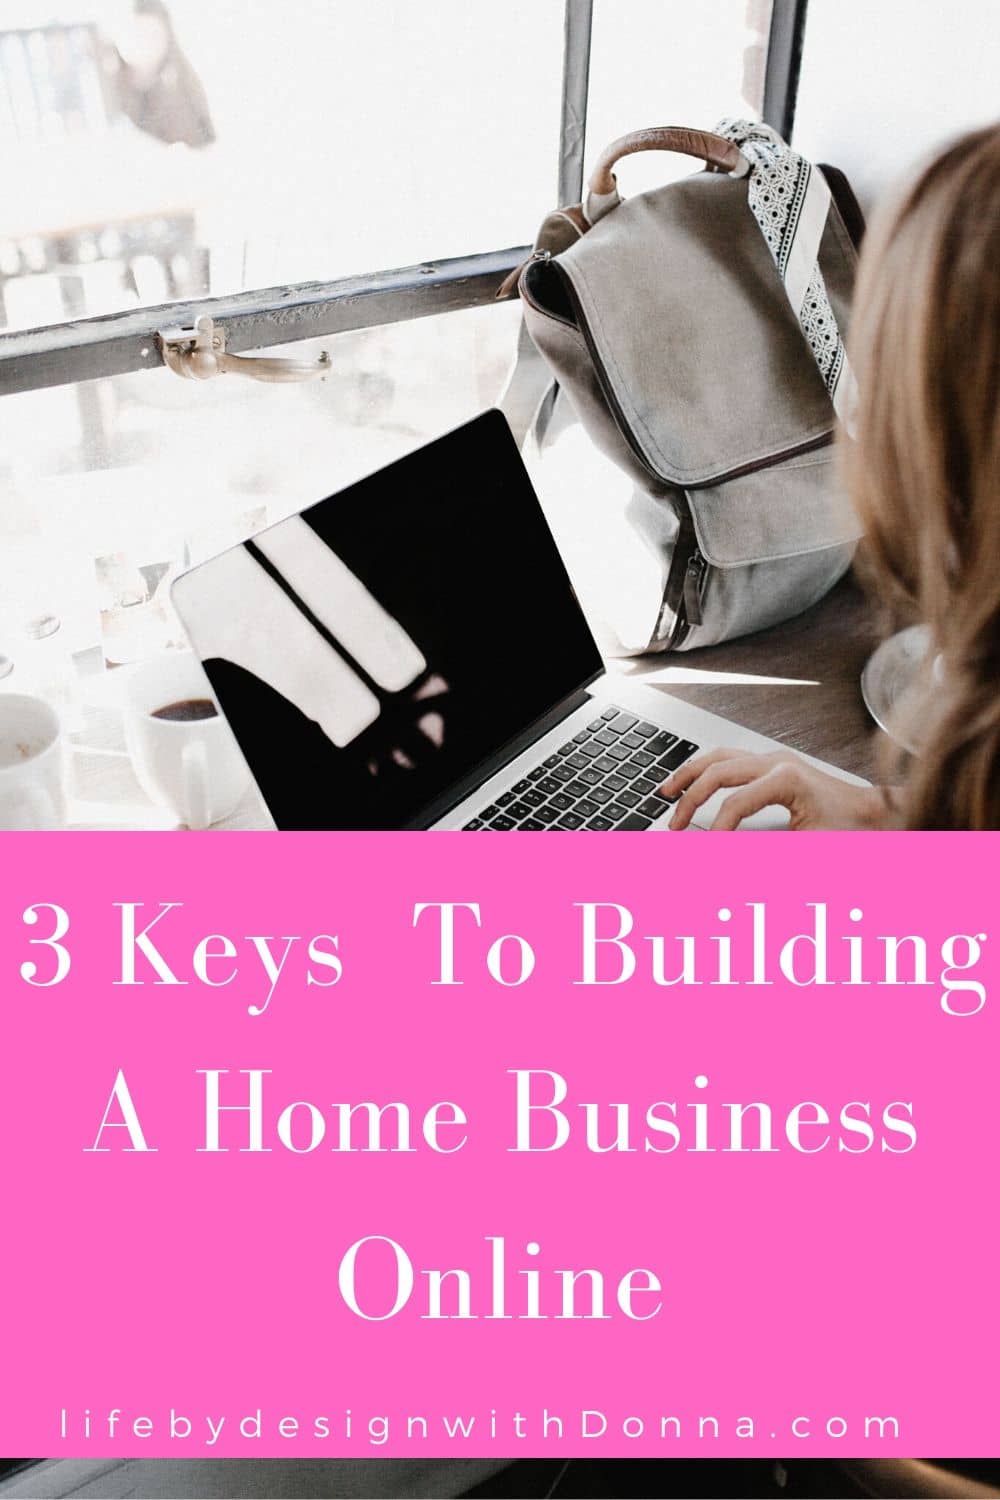 The 3  Main Keys To Guarantee   Success In  Building Your Home  Business Online